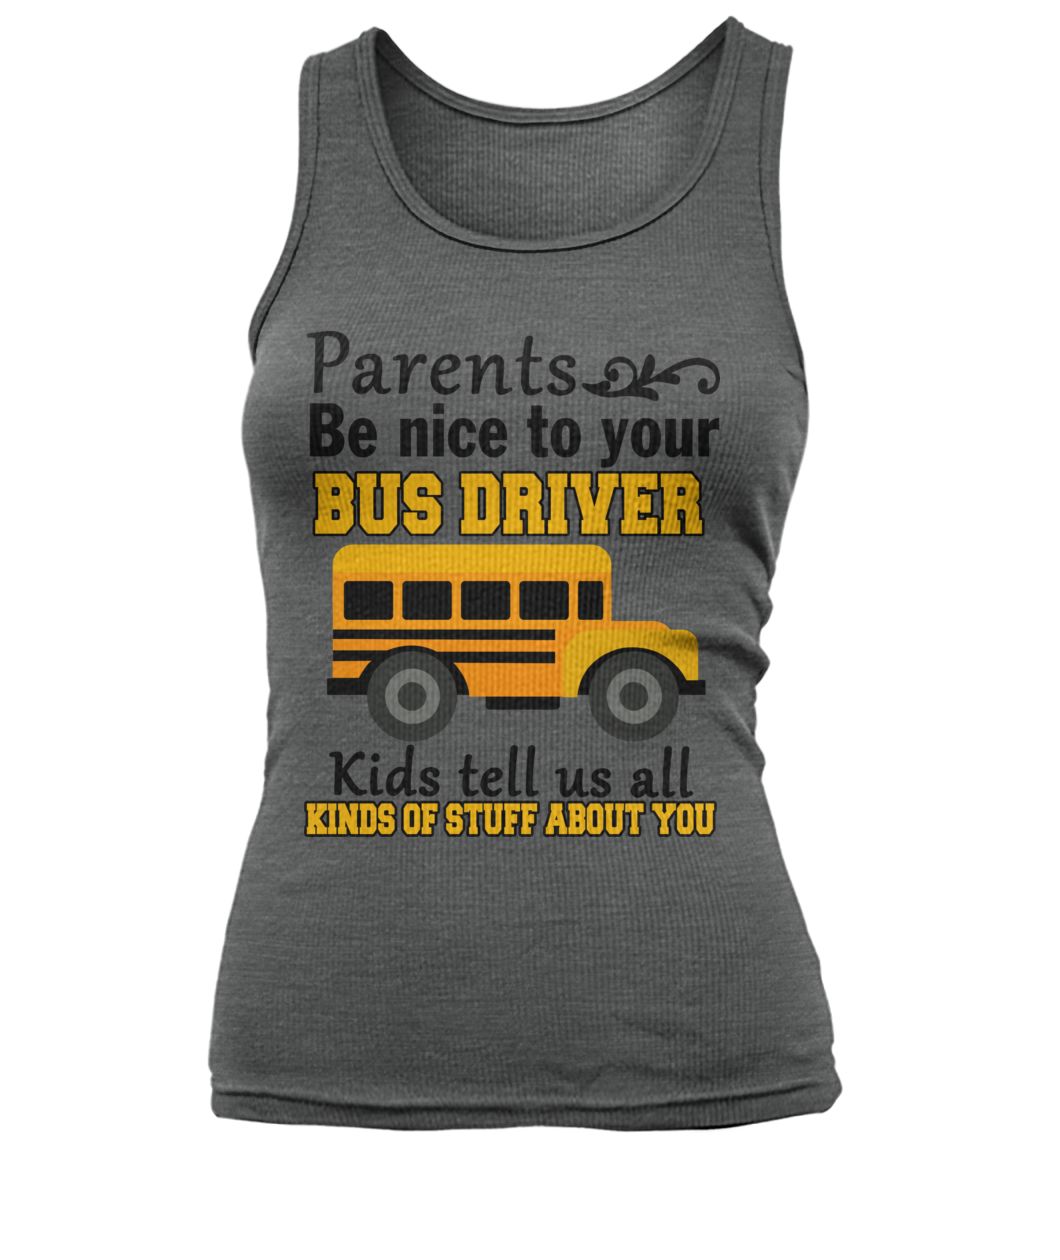 Parents be nice to the bus driver kids tell us all kind of stuff about you women's tank top